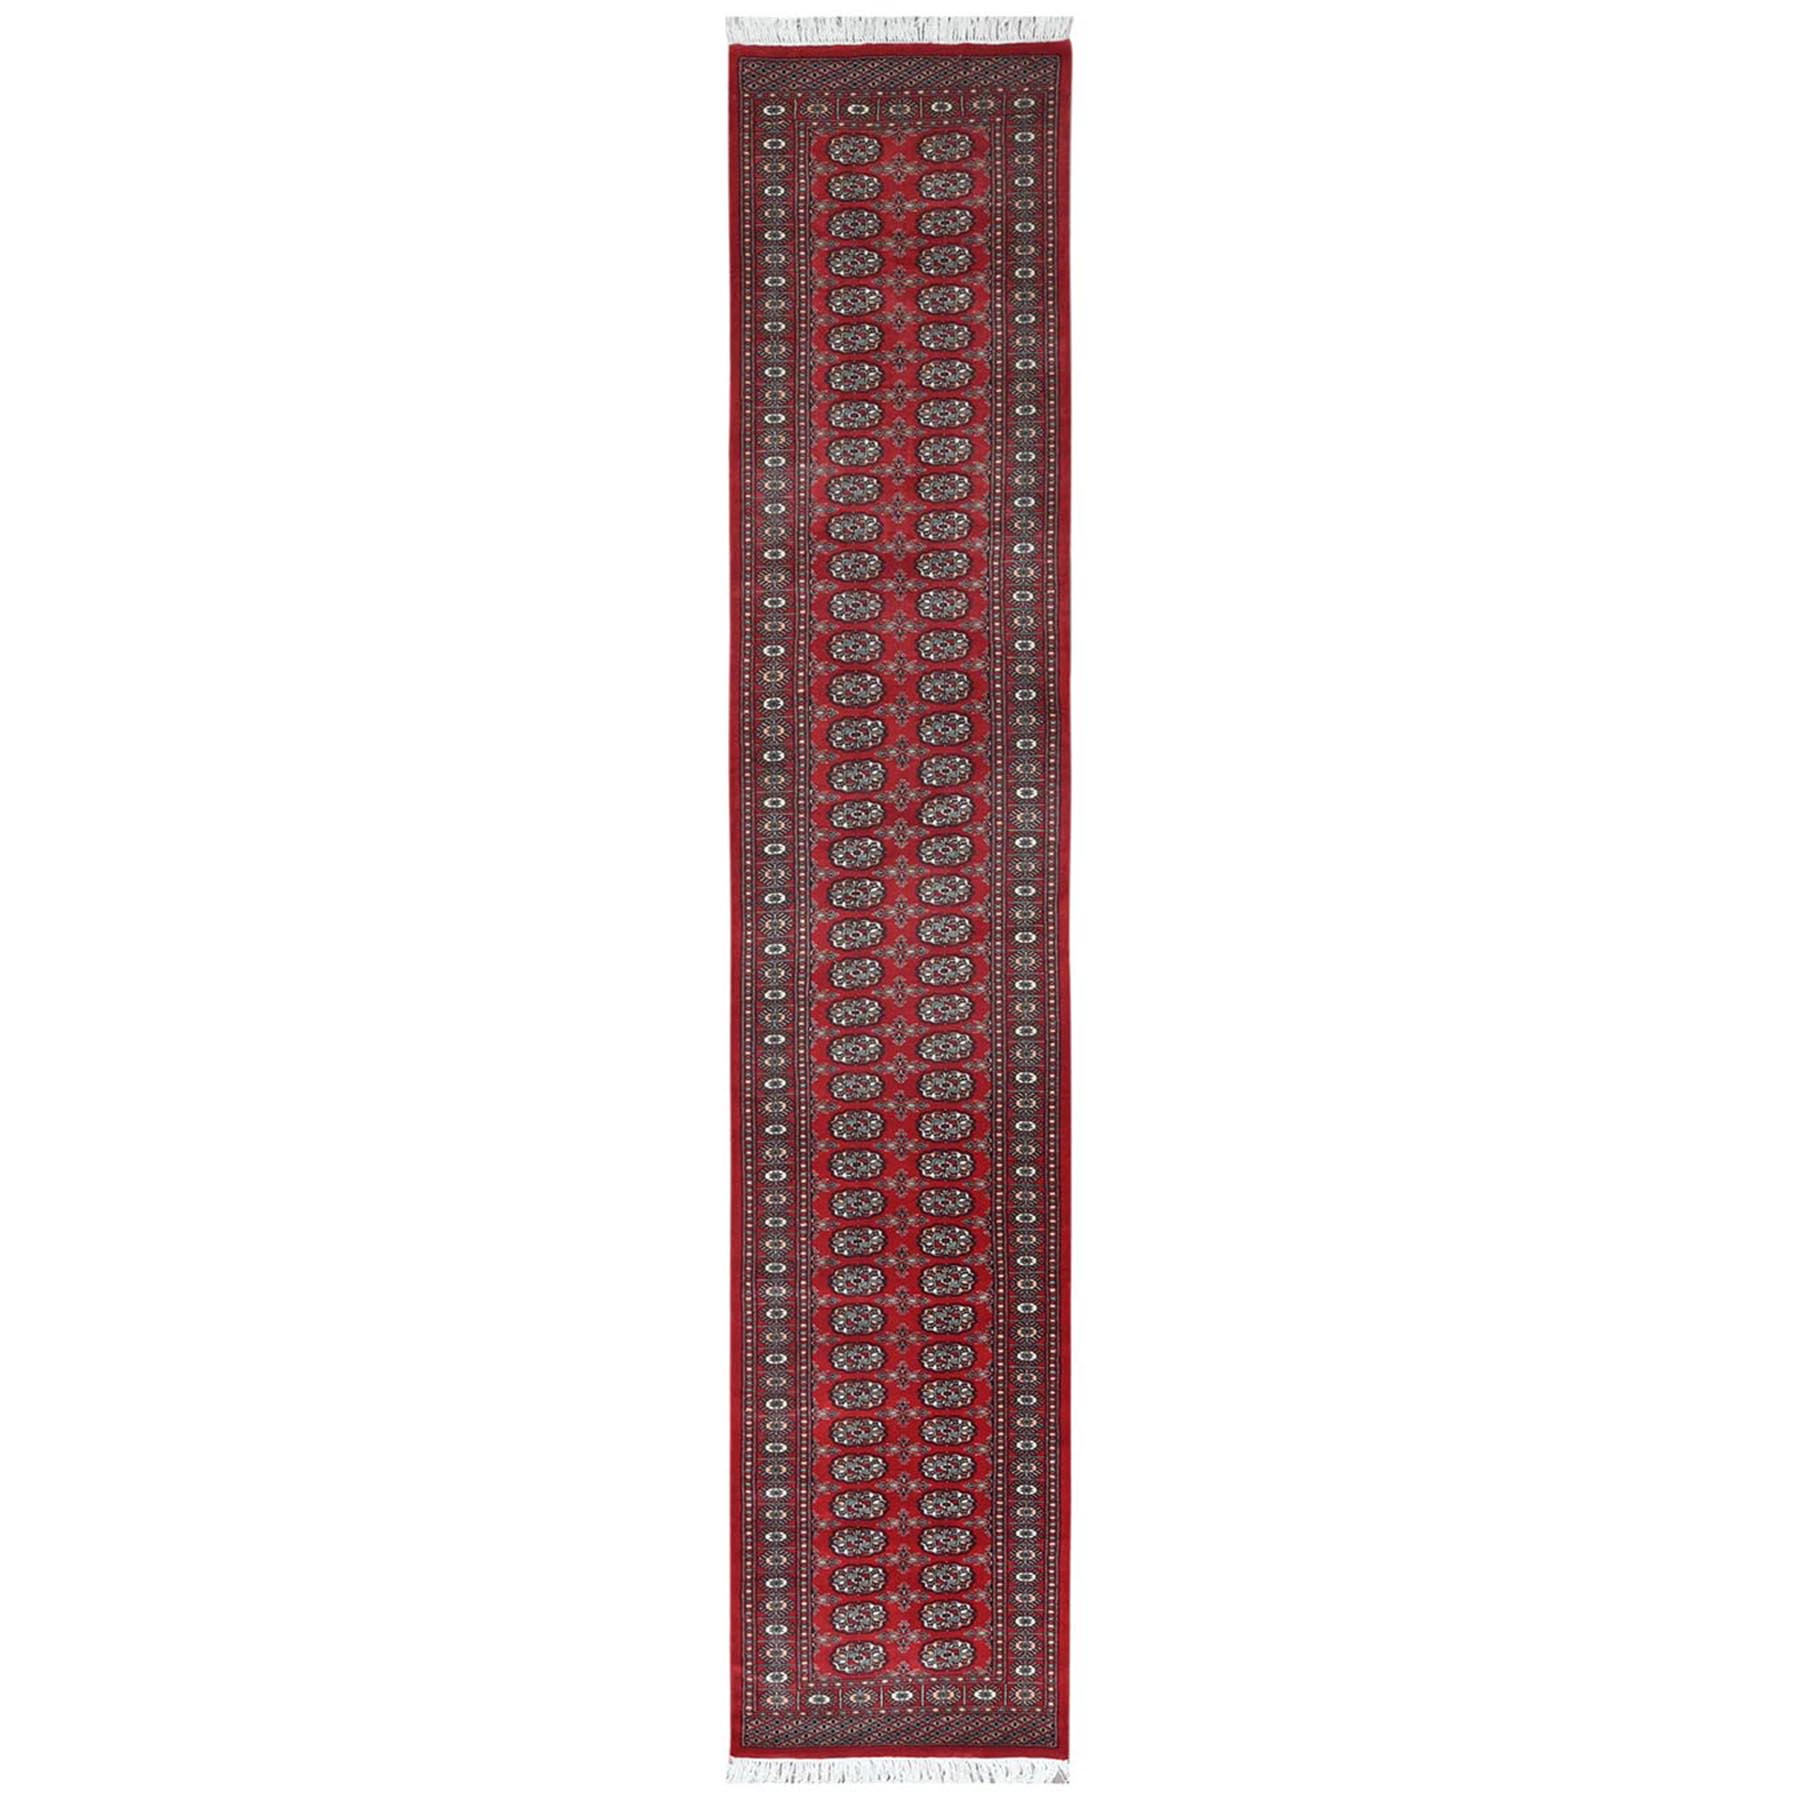 Nomadic And Village Collection Hand Knotted Red Rug No: 1122744